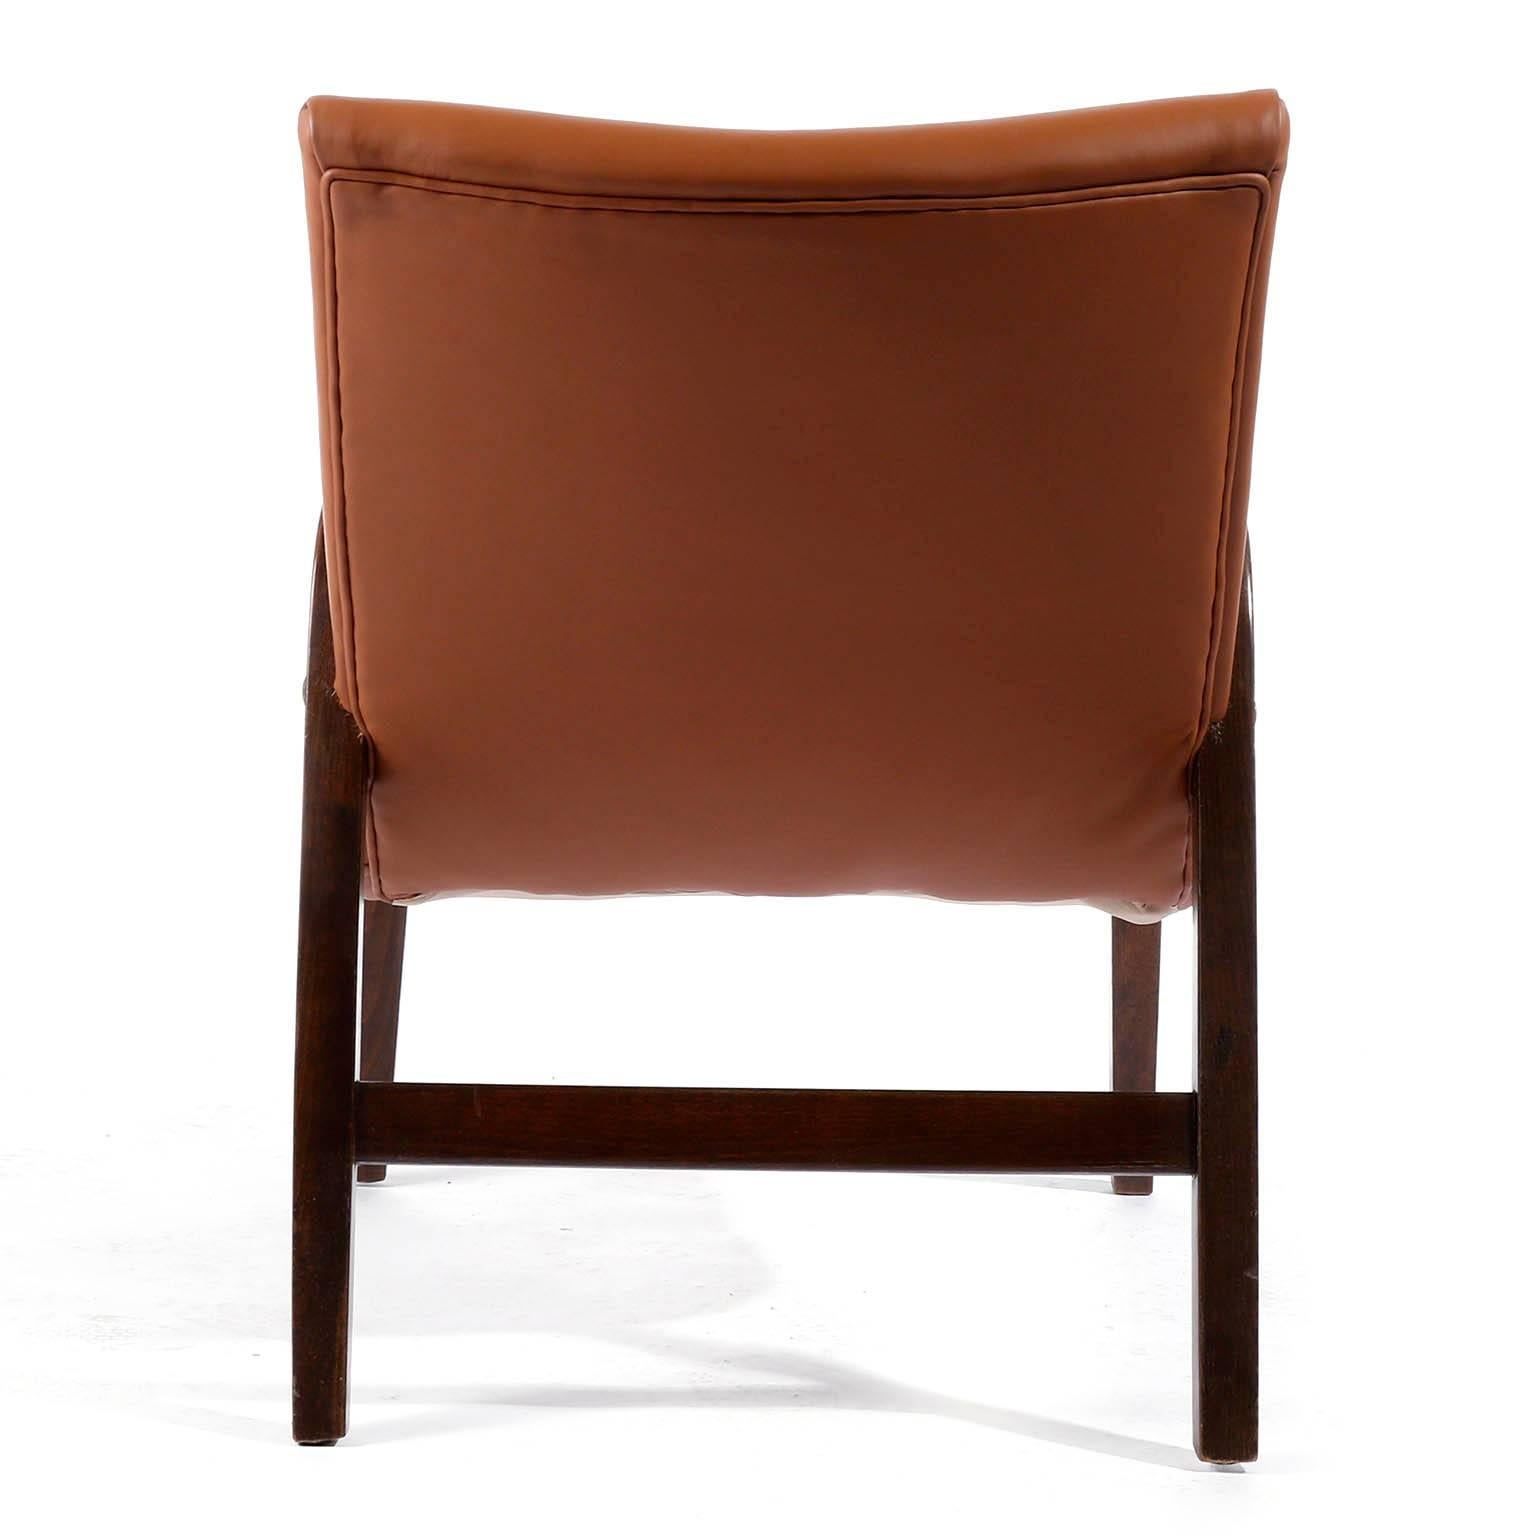 Mid-20th Century Pair of Roland Rainer Chairs Armchairs Cafe Ritter Cognac Leather Austria, 1950s For Sale